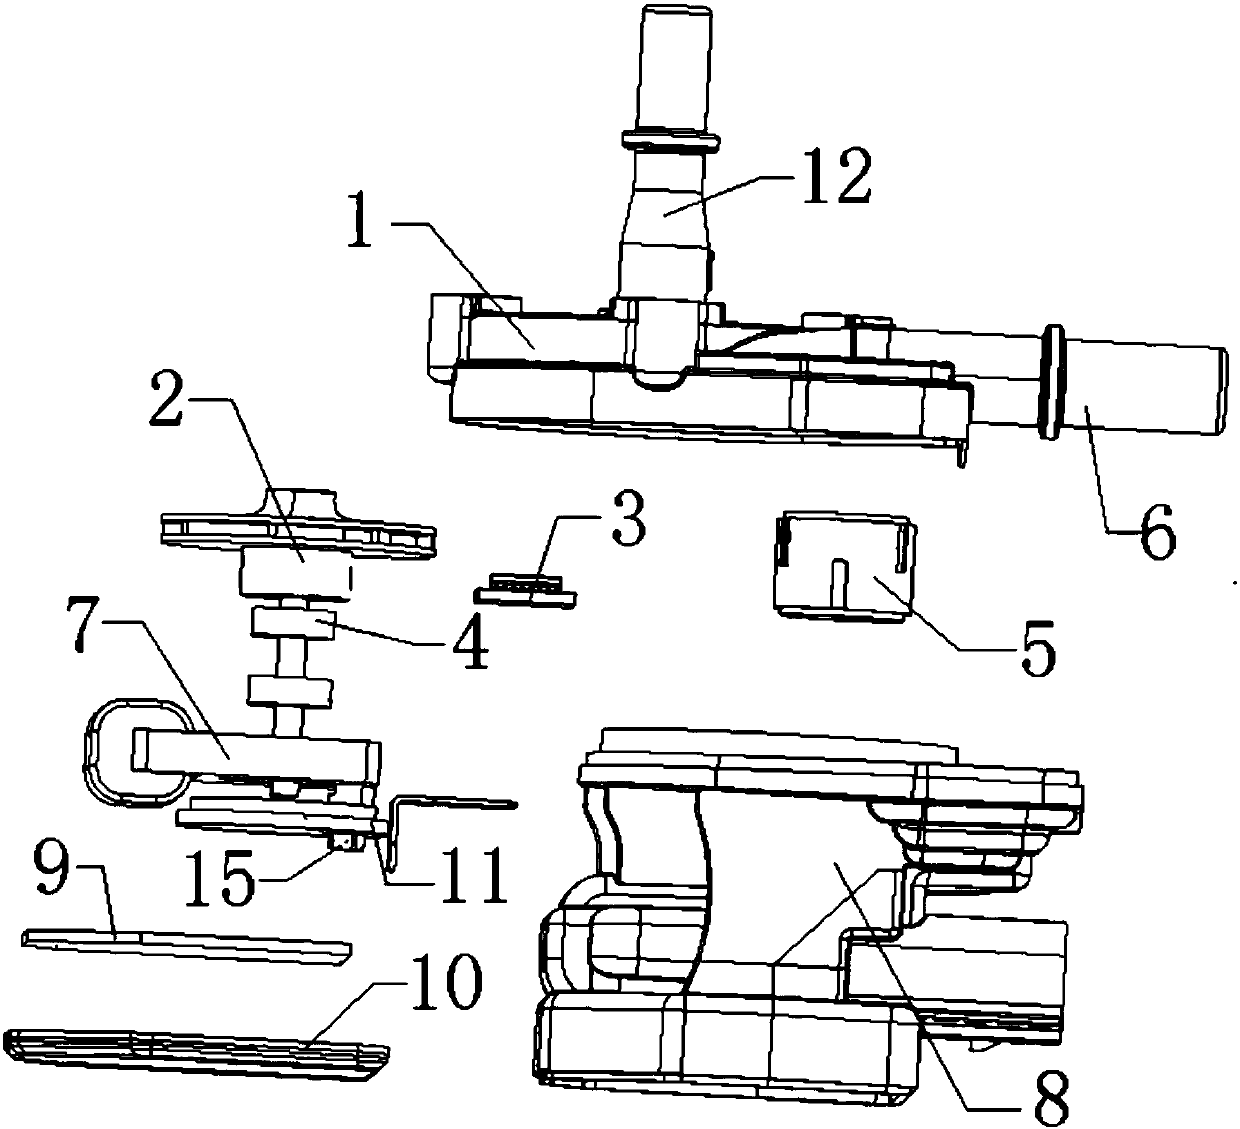 A gasoline vapor purification device with backflow function